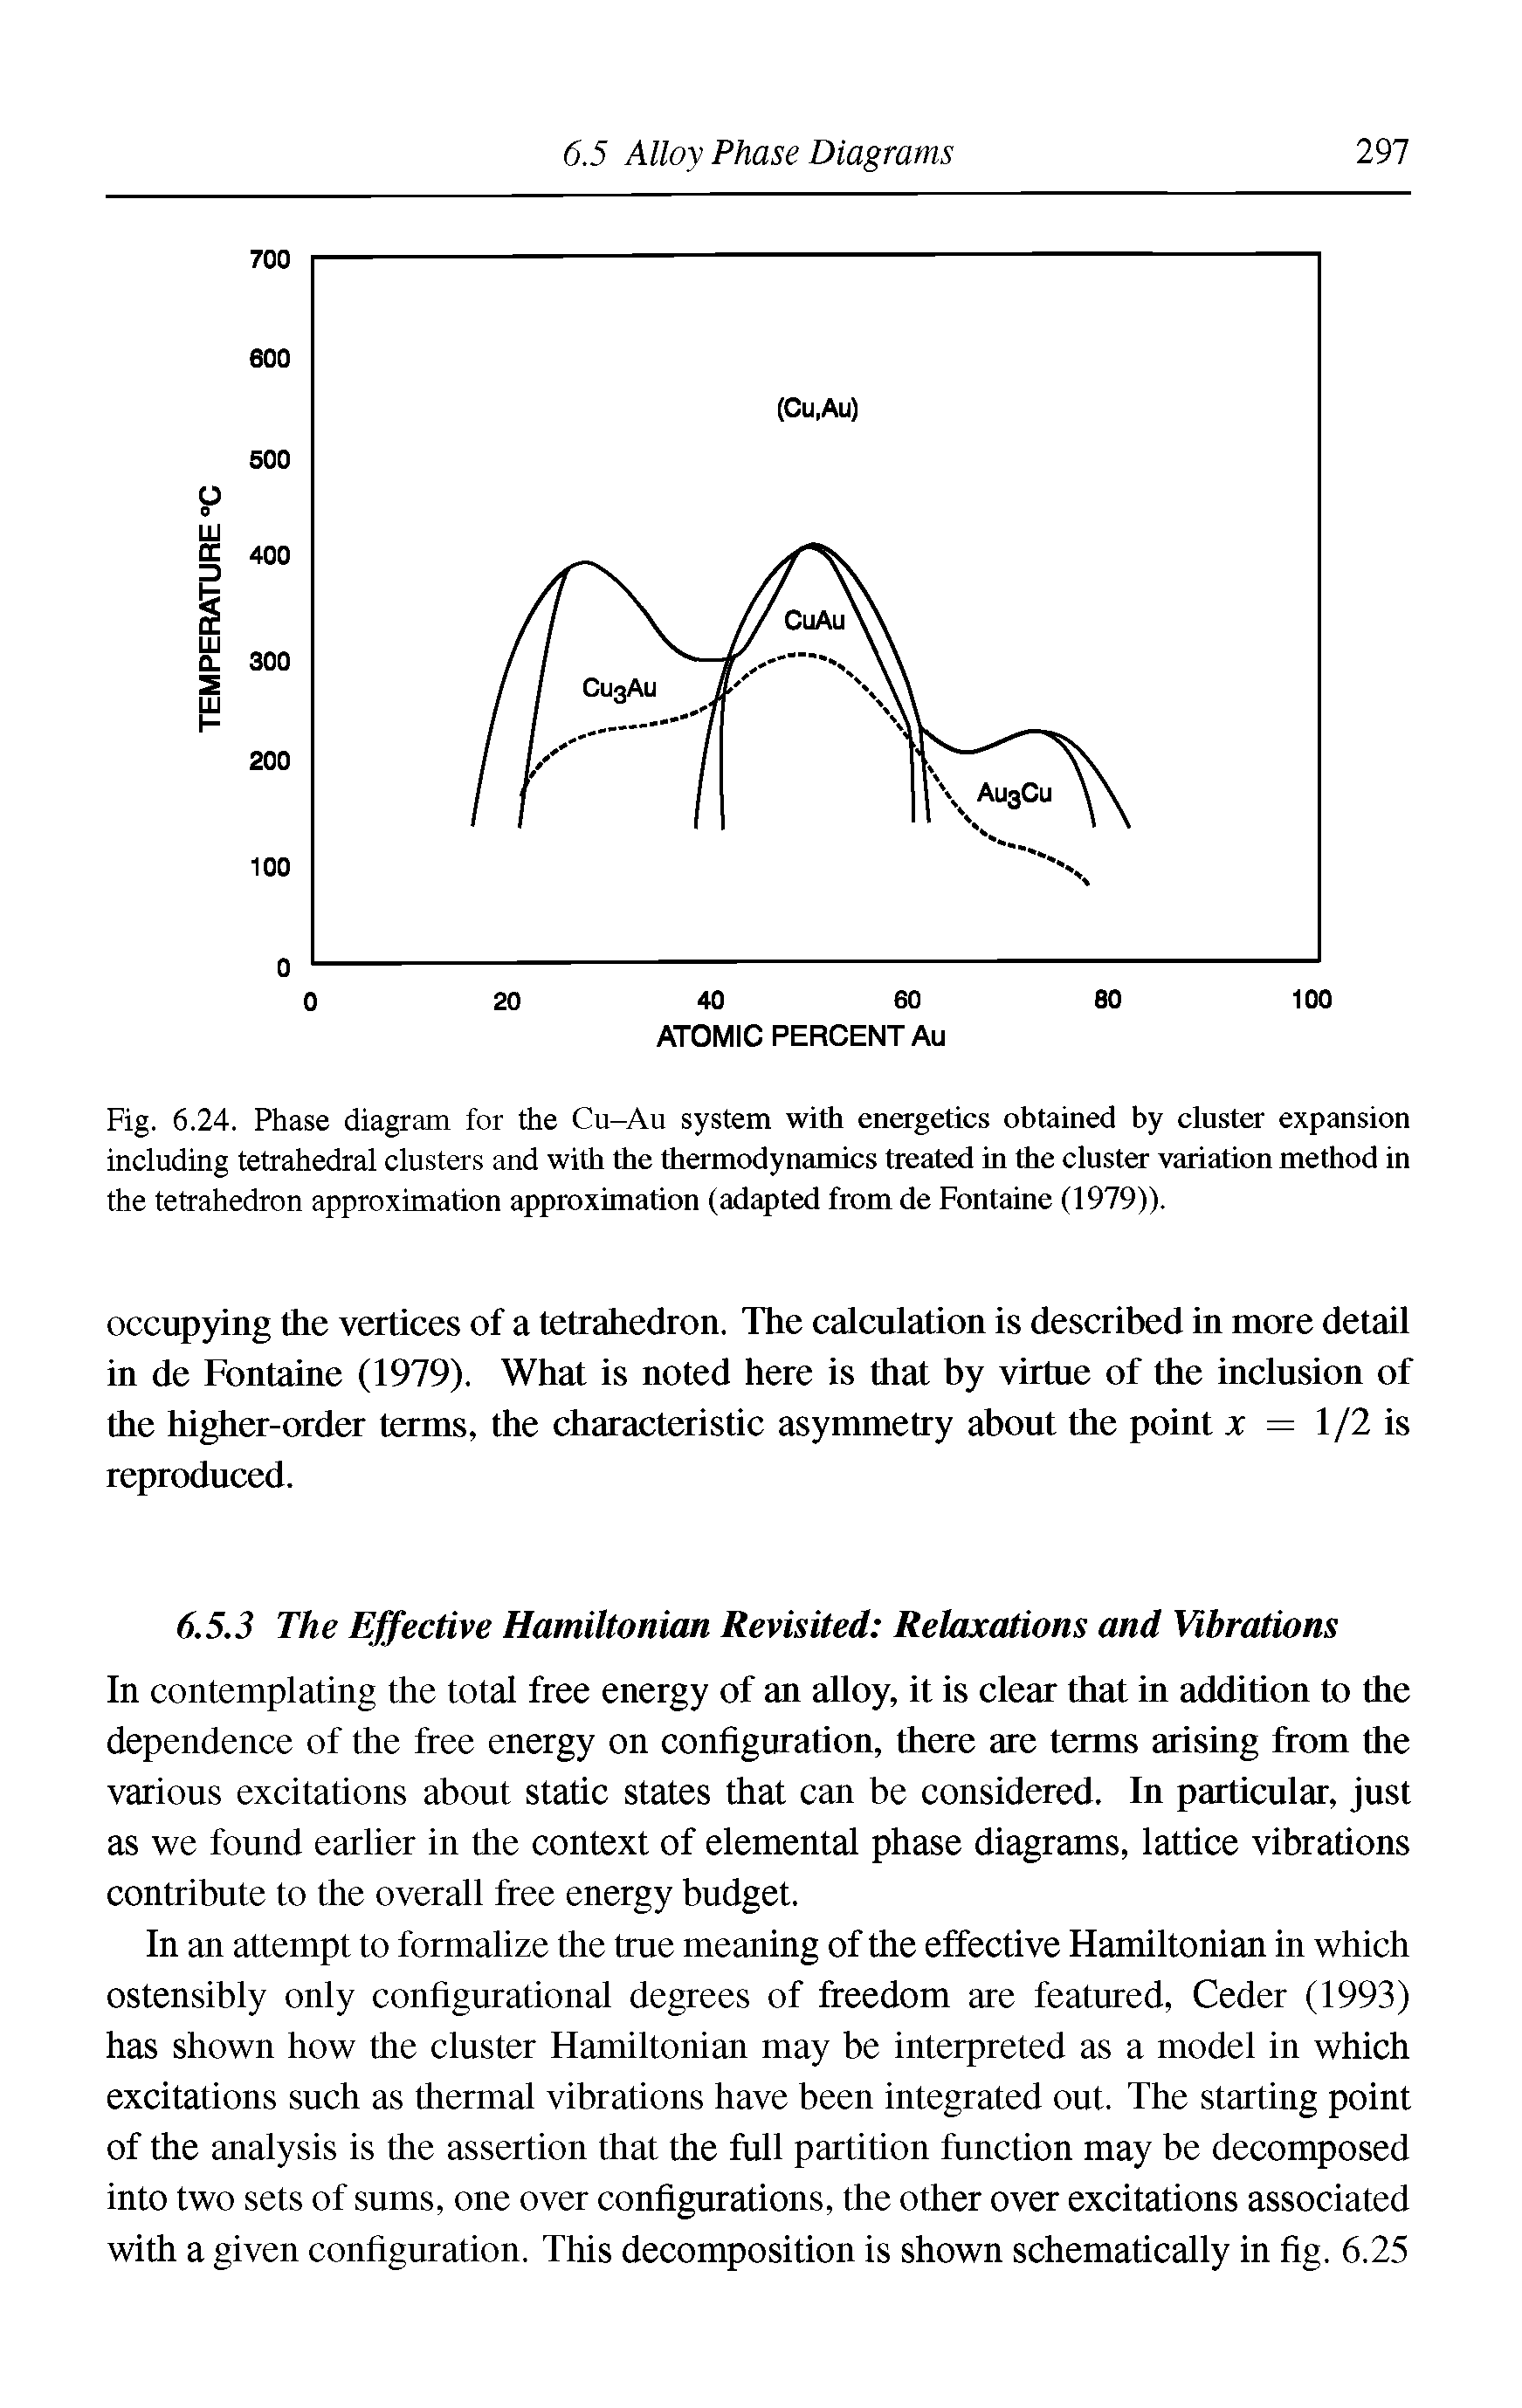 Fig. 6.24. Phase diagram for the Cu-Au system with energetics obtained by clnster expansion including tetrahedral clusters and with the thermodynamics treated in the cluster variation method in the tetrahedron approximation approximation (adapted from de Fontaine (1979)).